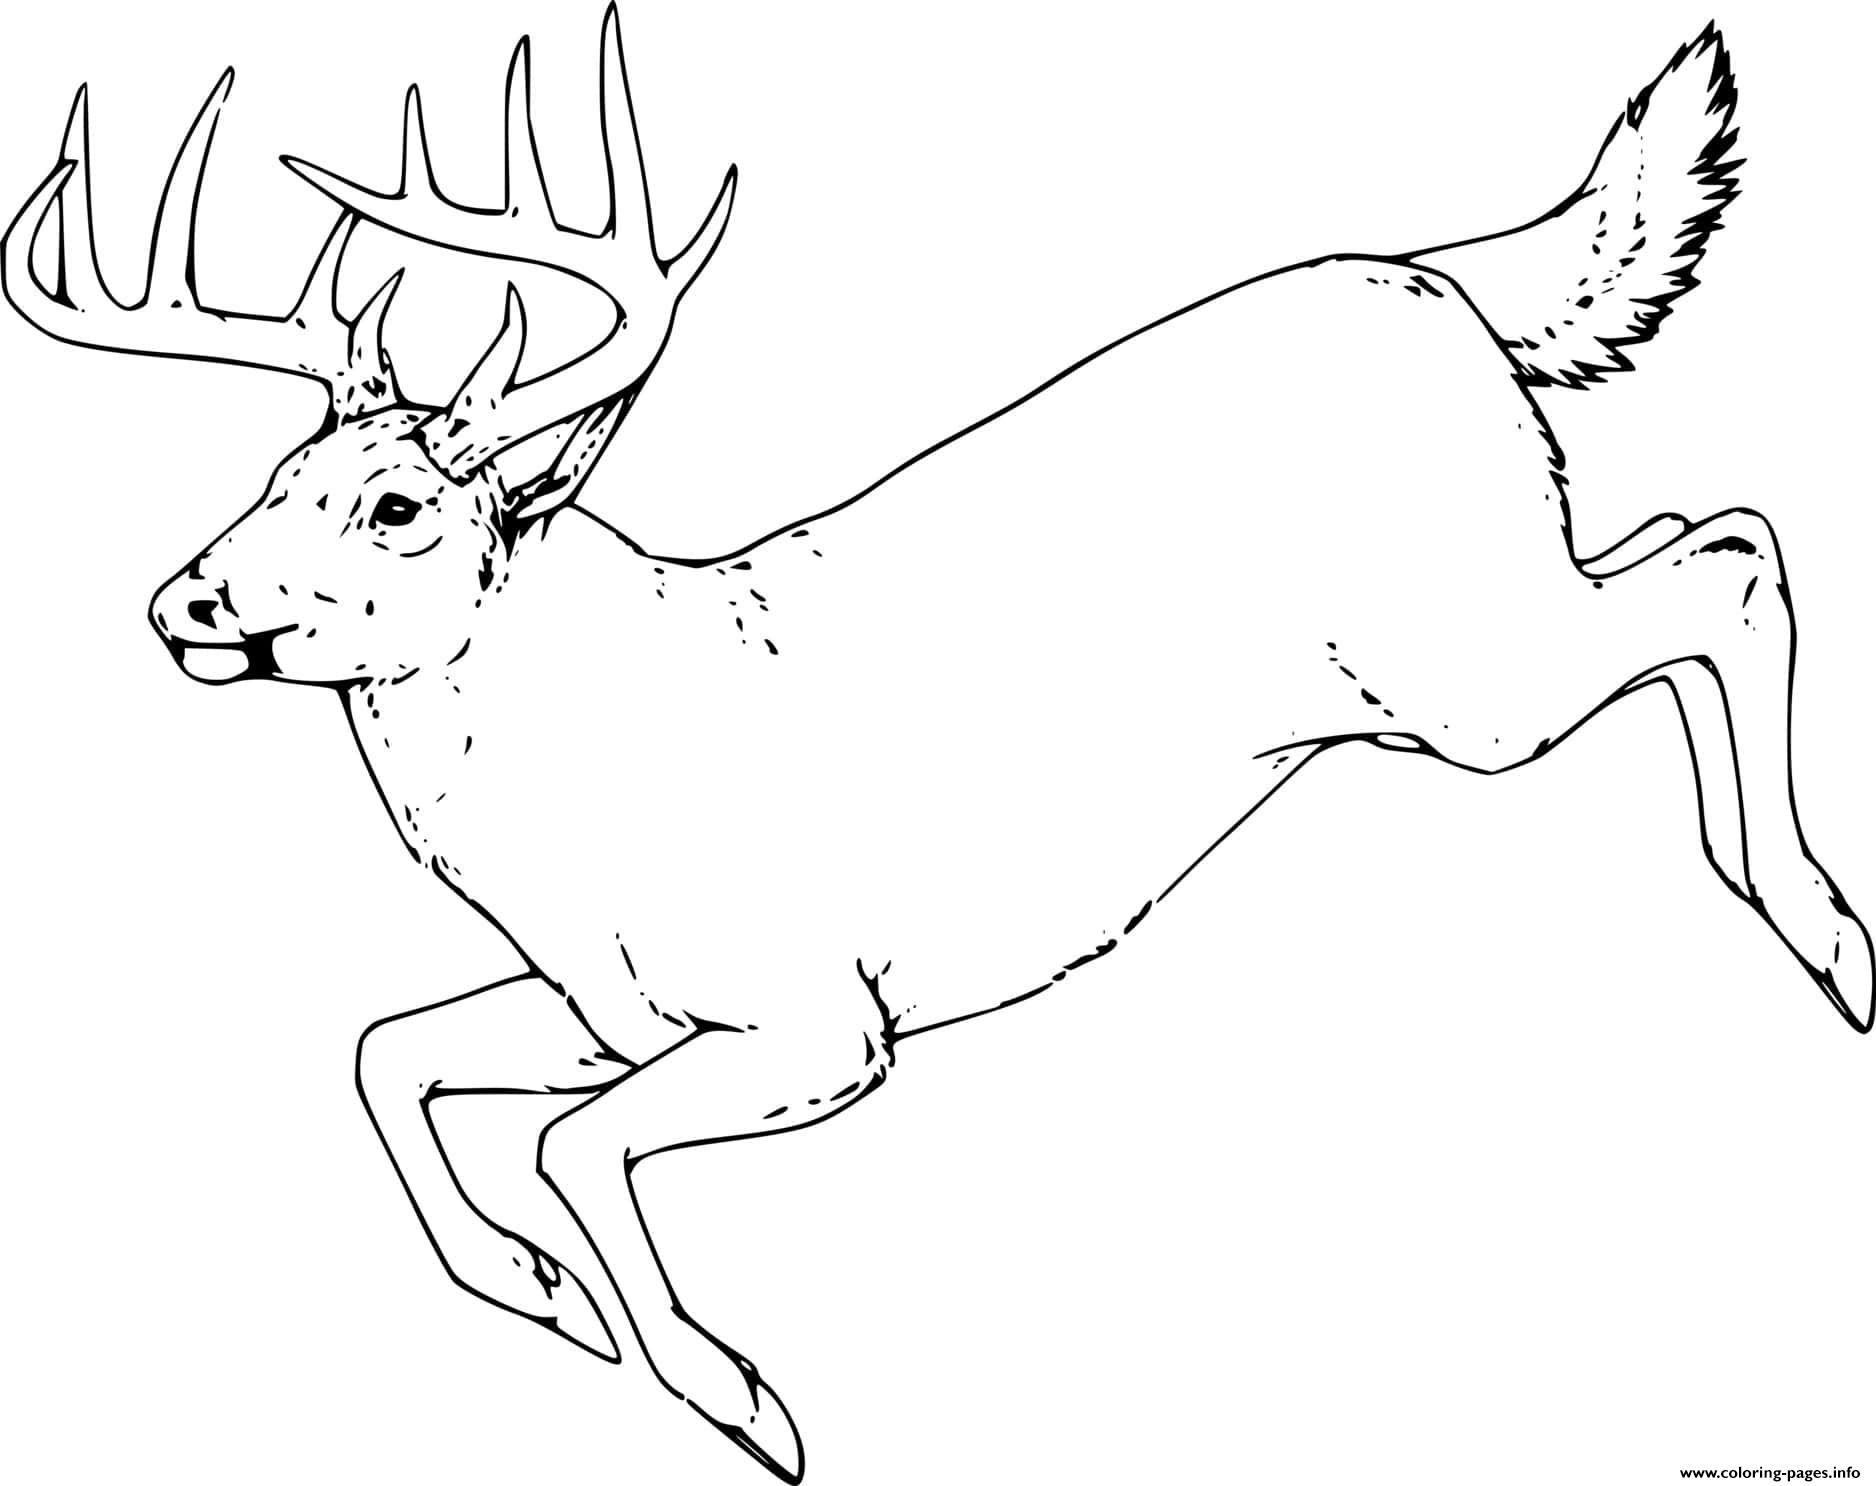 Coloring Pages Of Realistic Deer - Realistic Deer Coloring Page 3